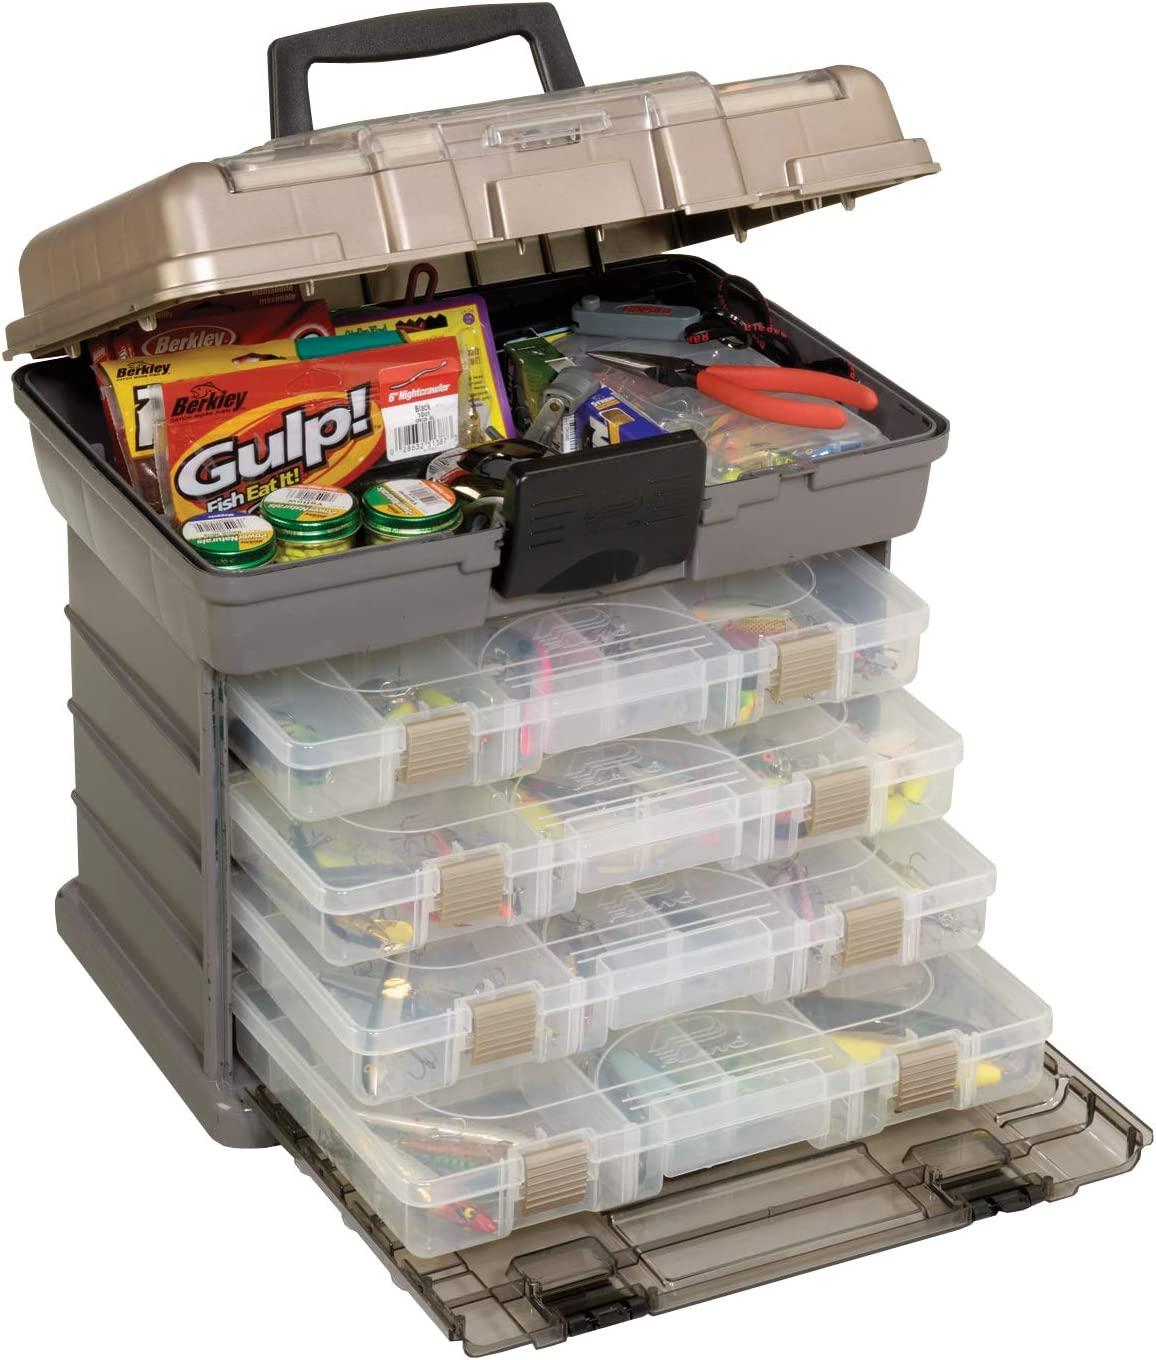 Plano 137401 By Rack System 3700 Size Tackle Box, Multi, 16 X 12